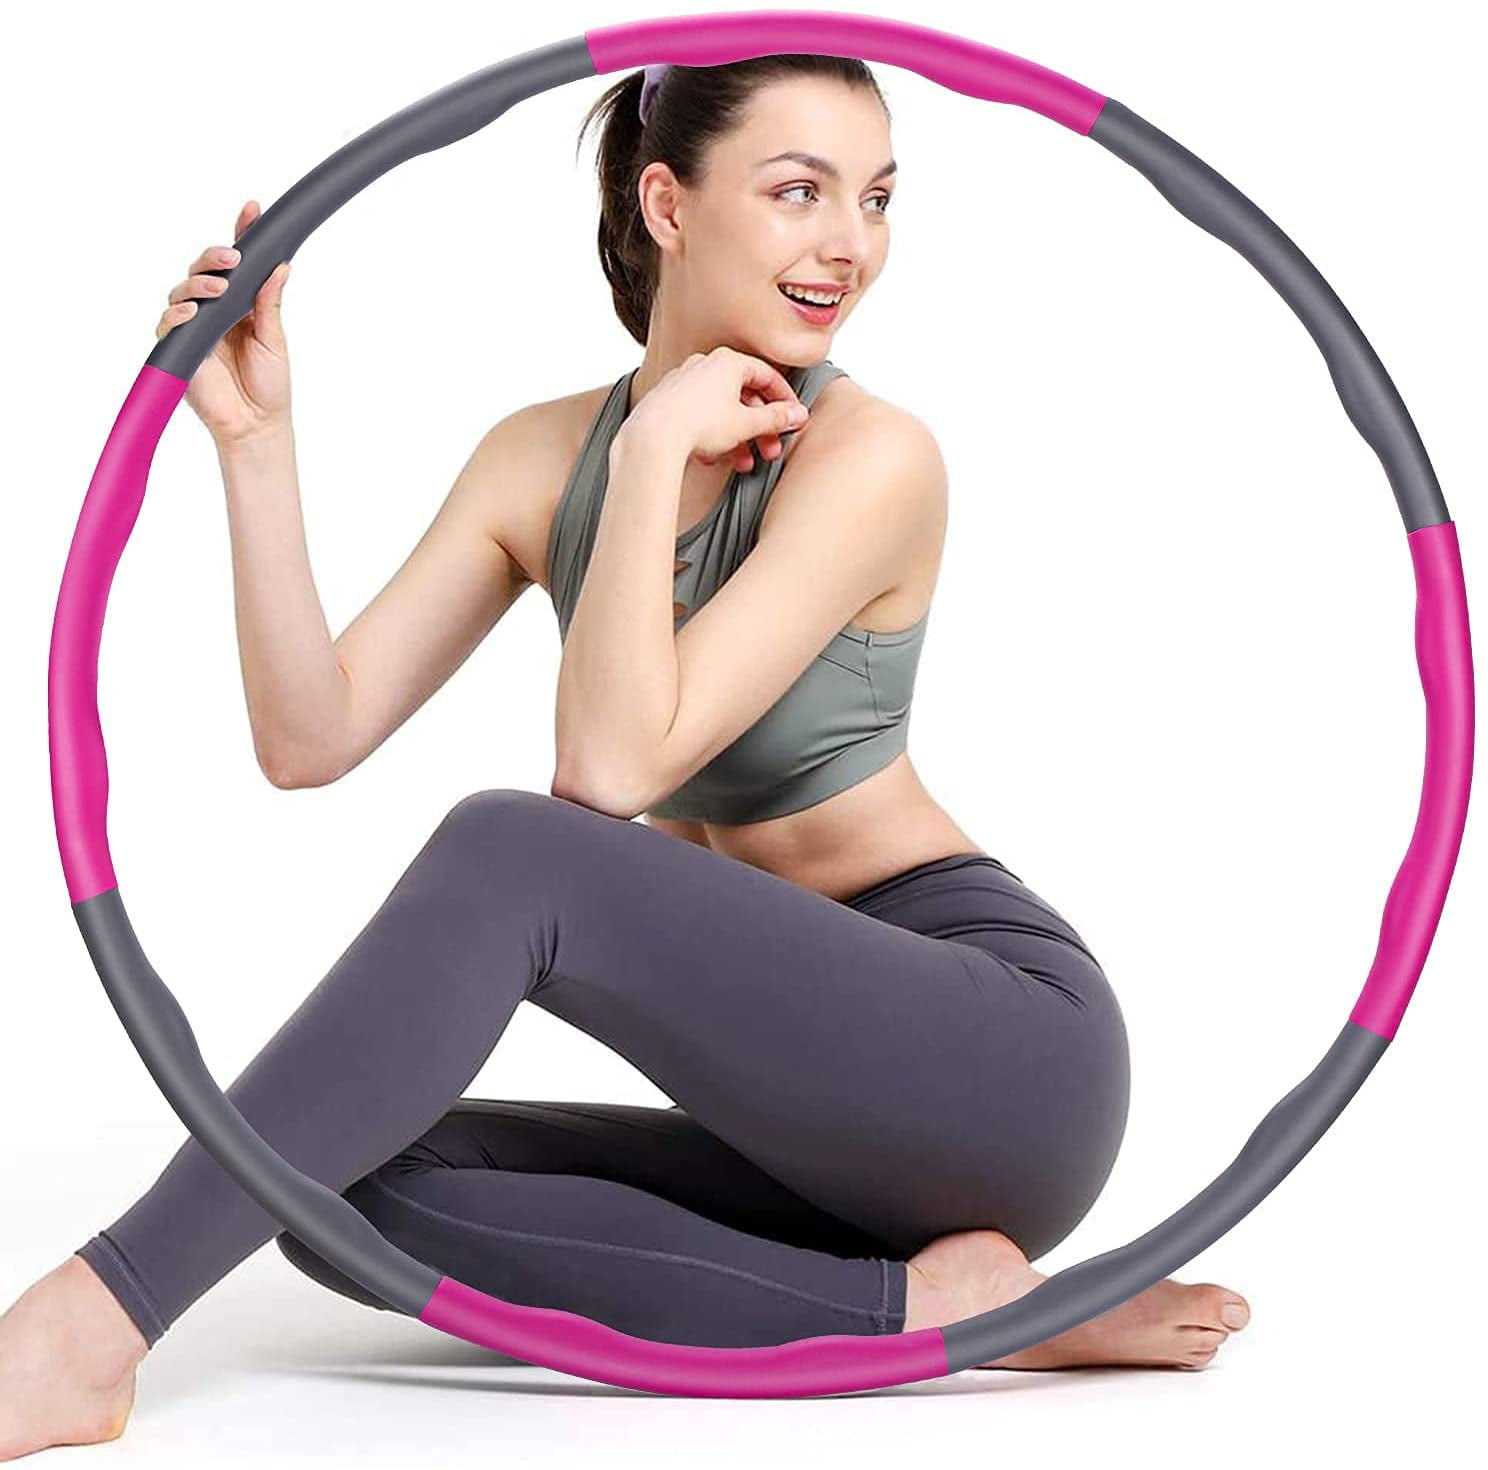 Details about   8 Section Collapsible Weighted Hula Hoop Fitness Exercise Gym Workout Hoola 